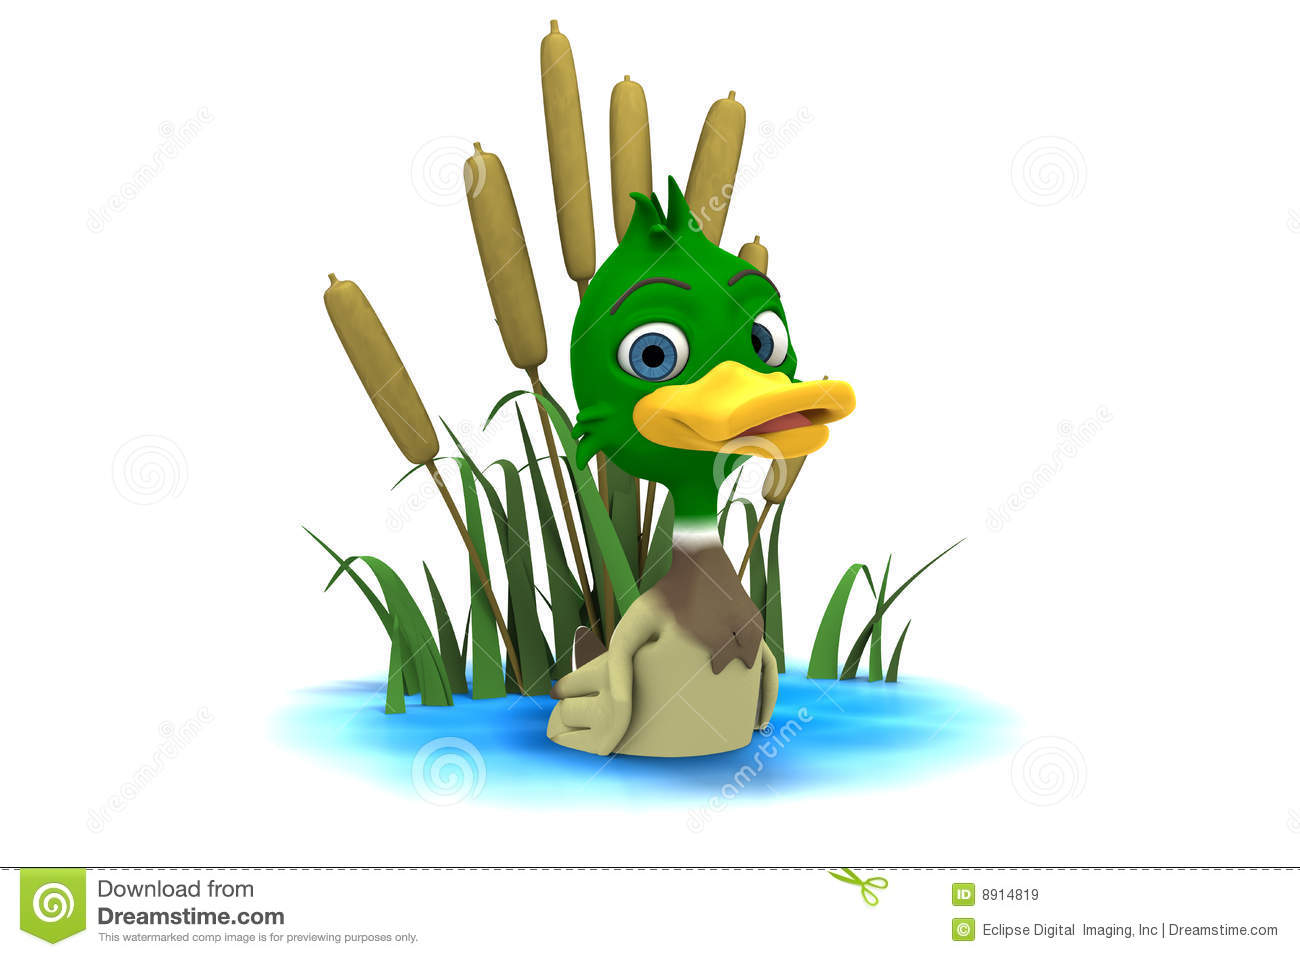 Mallard Duck Sitting In Pond Royalty Free Stock Images   Image